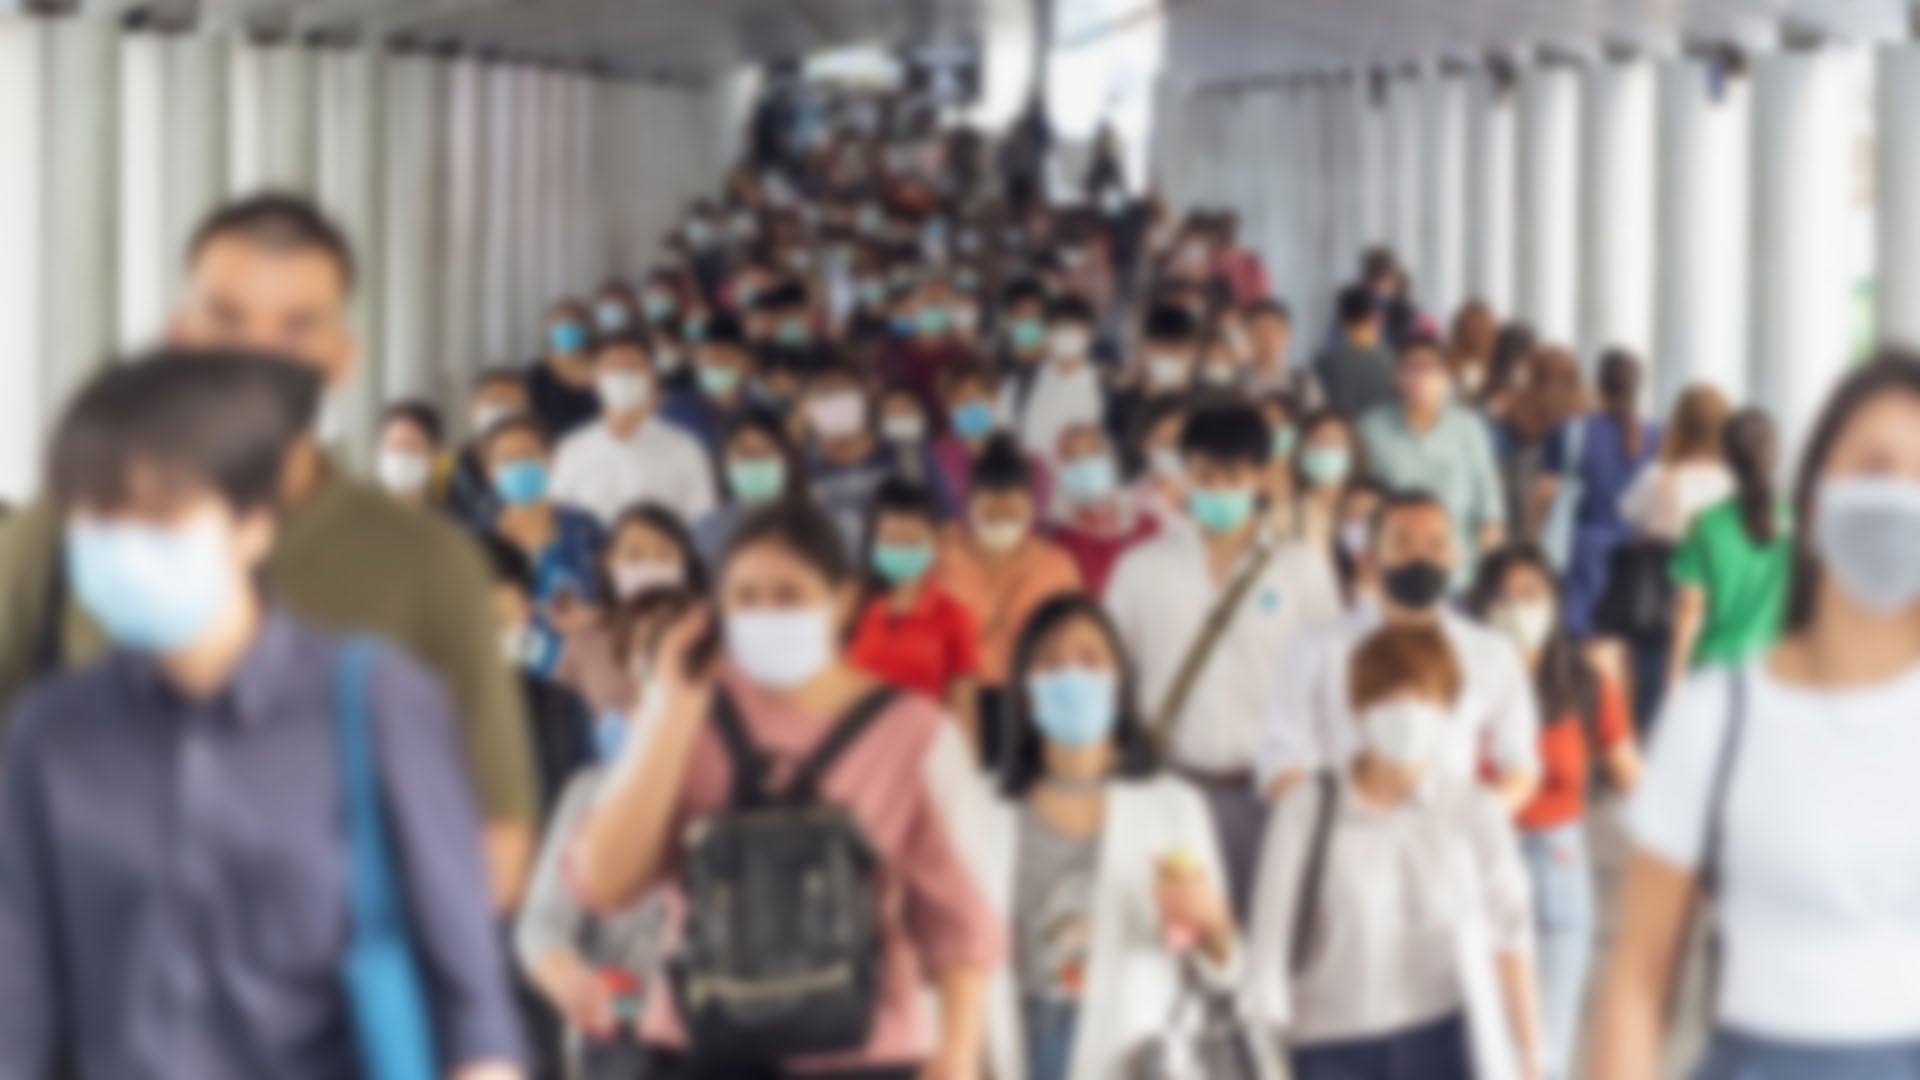 Top 5 Products for New Pandemic Surge